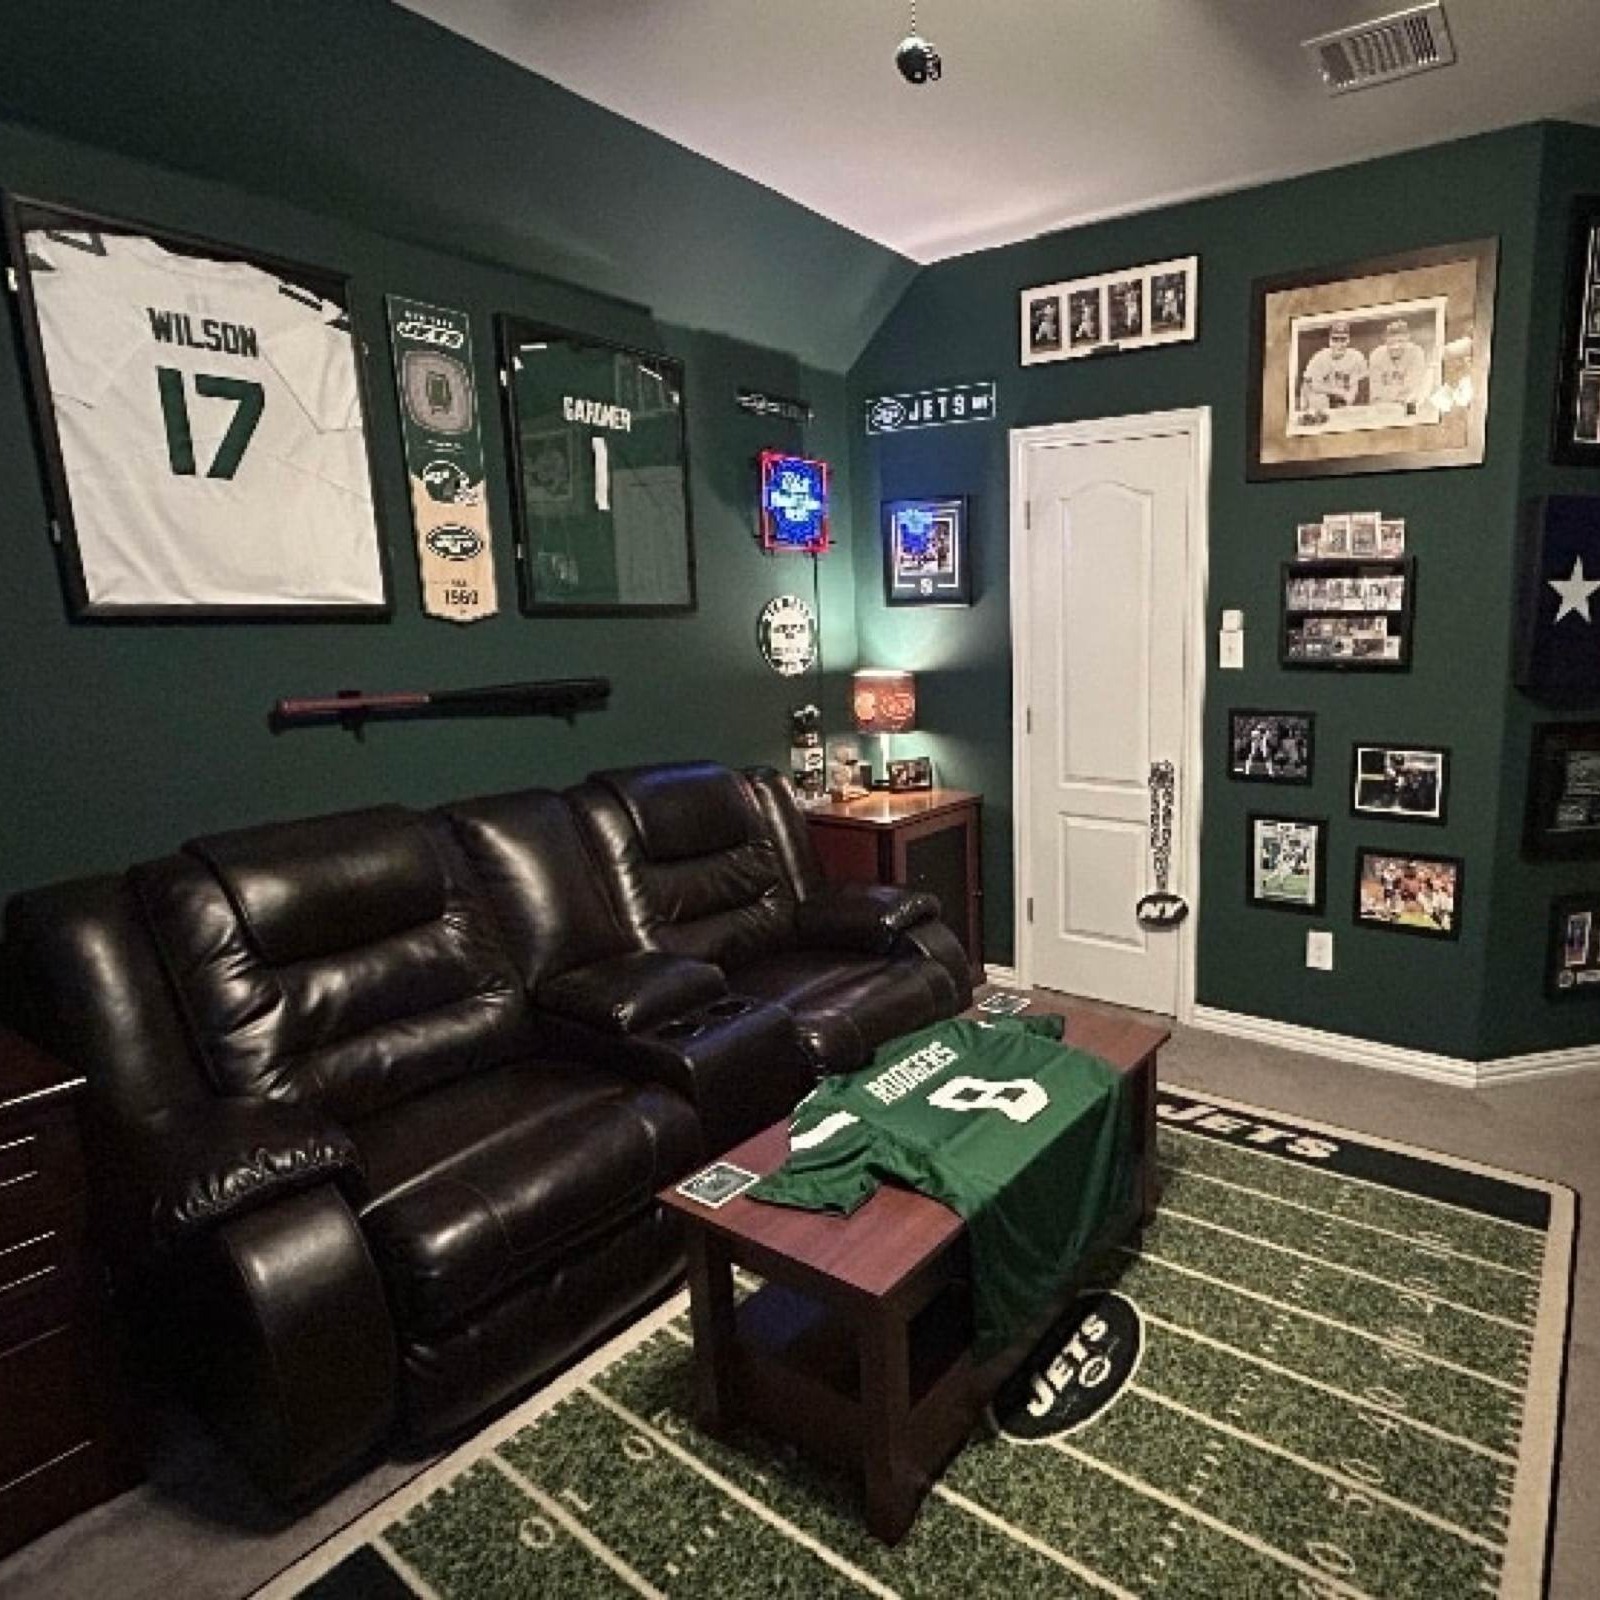 Are Mancaves Over-Rated?